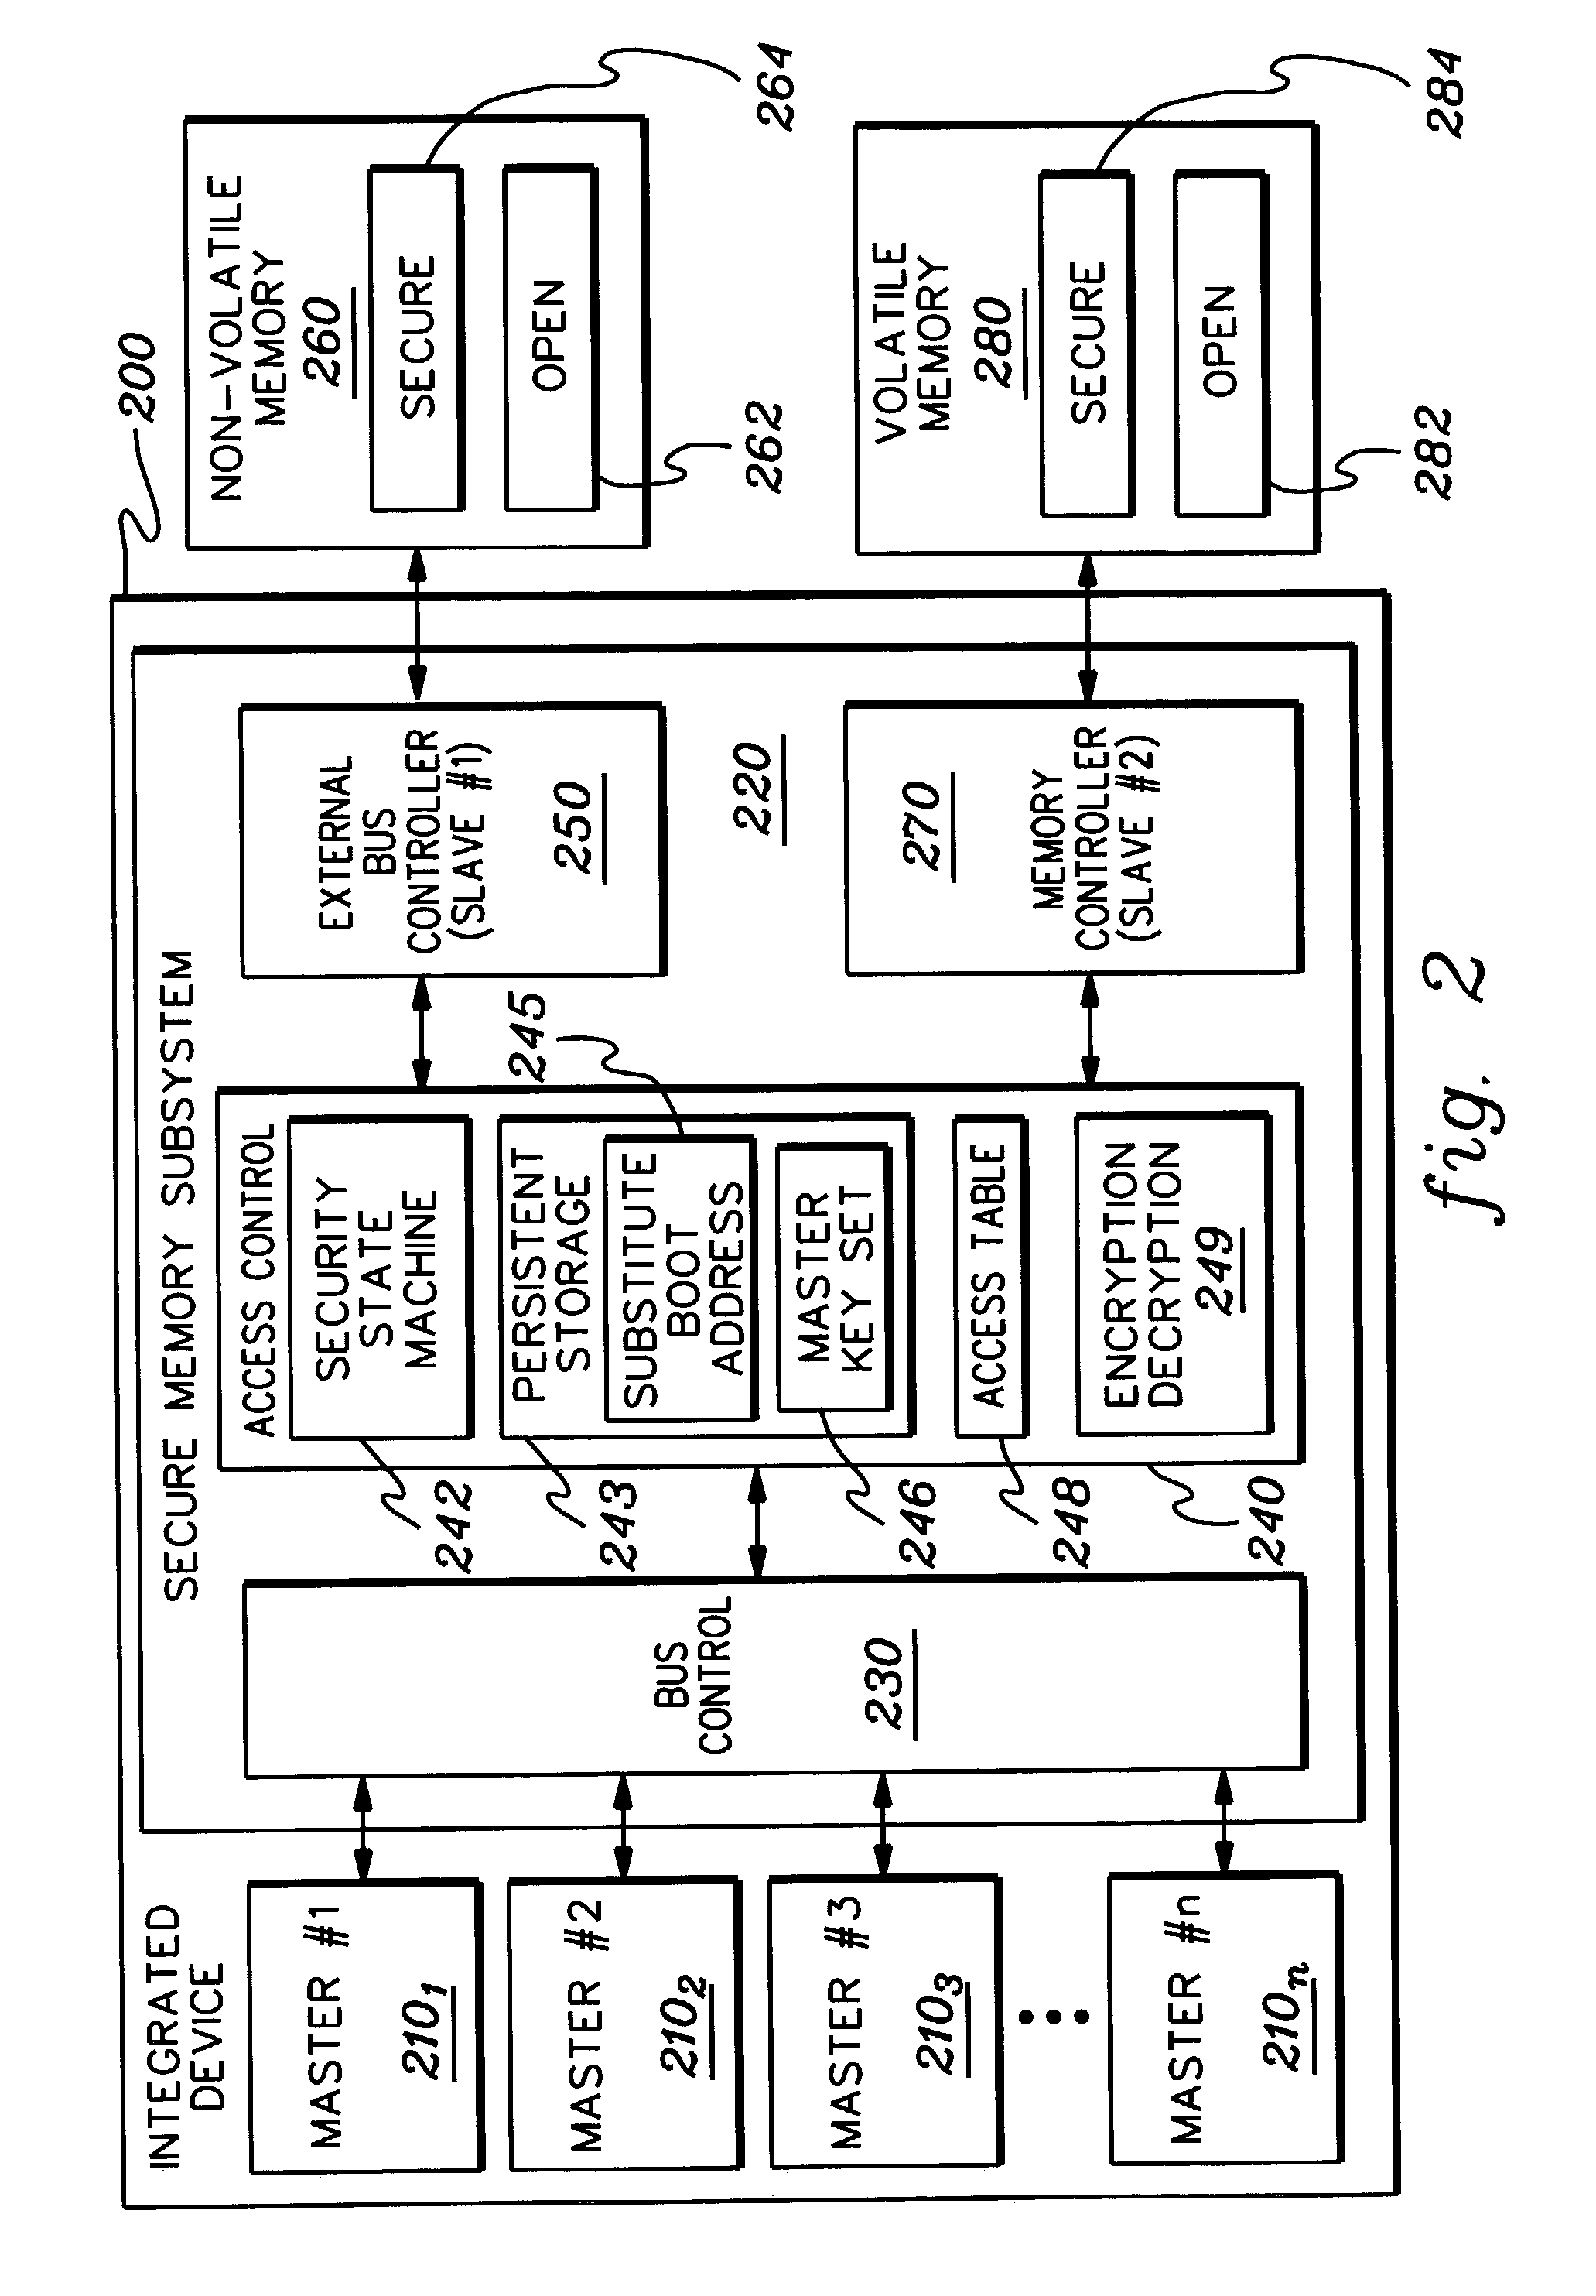 Control function with multiple security states for facilitating secure operation of an integrated system